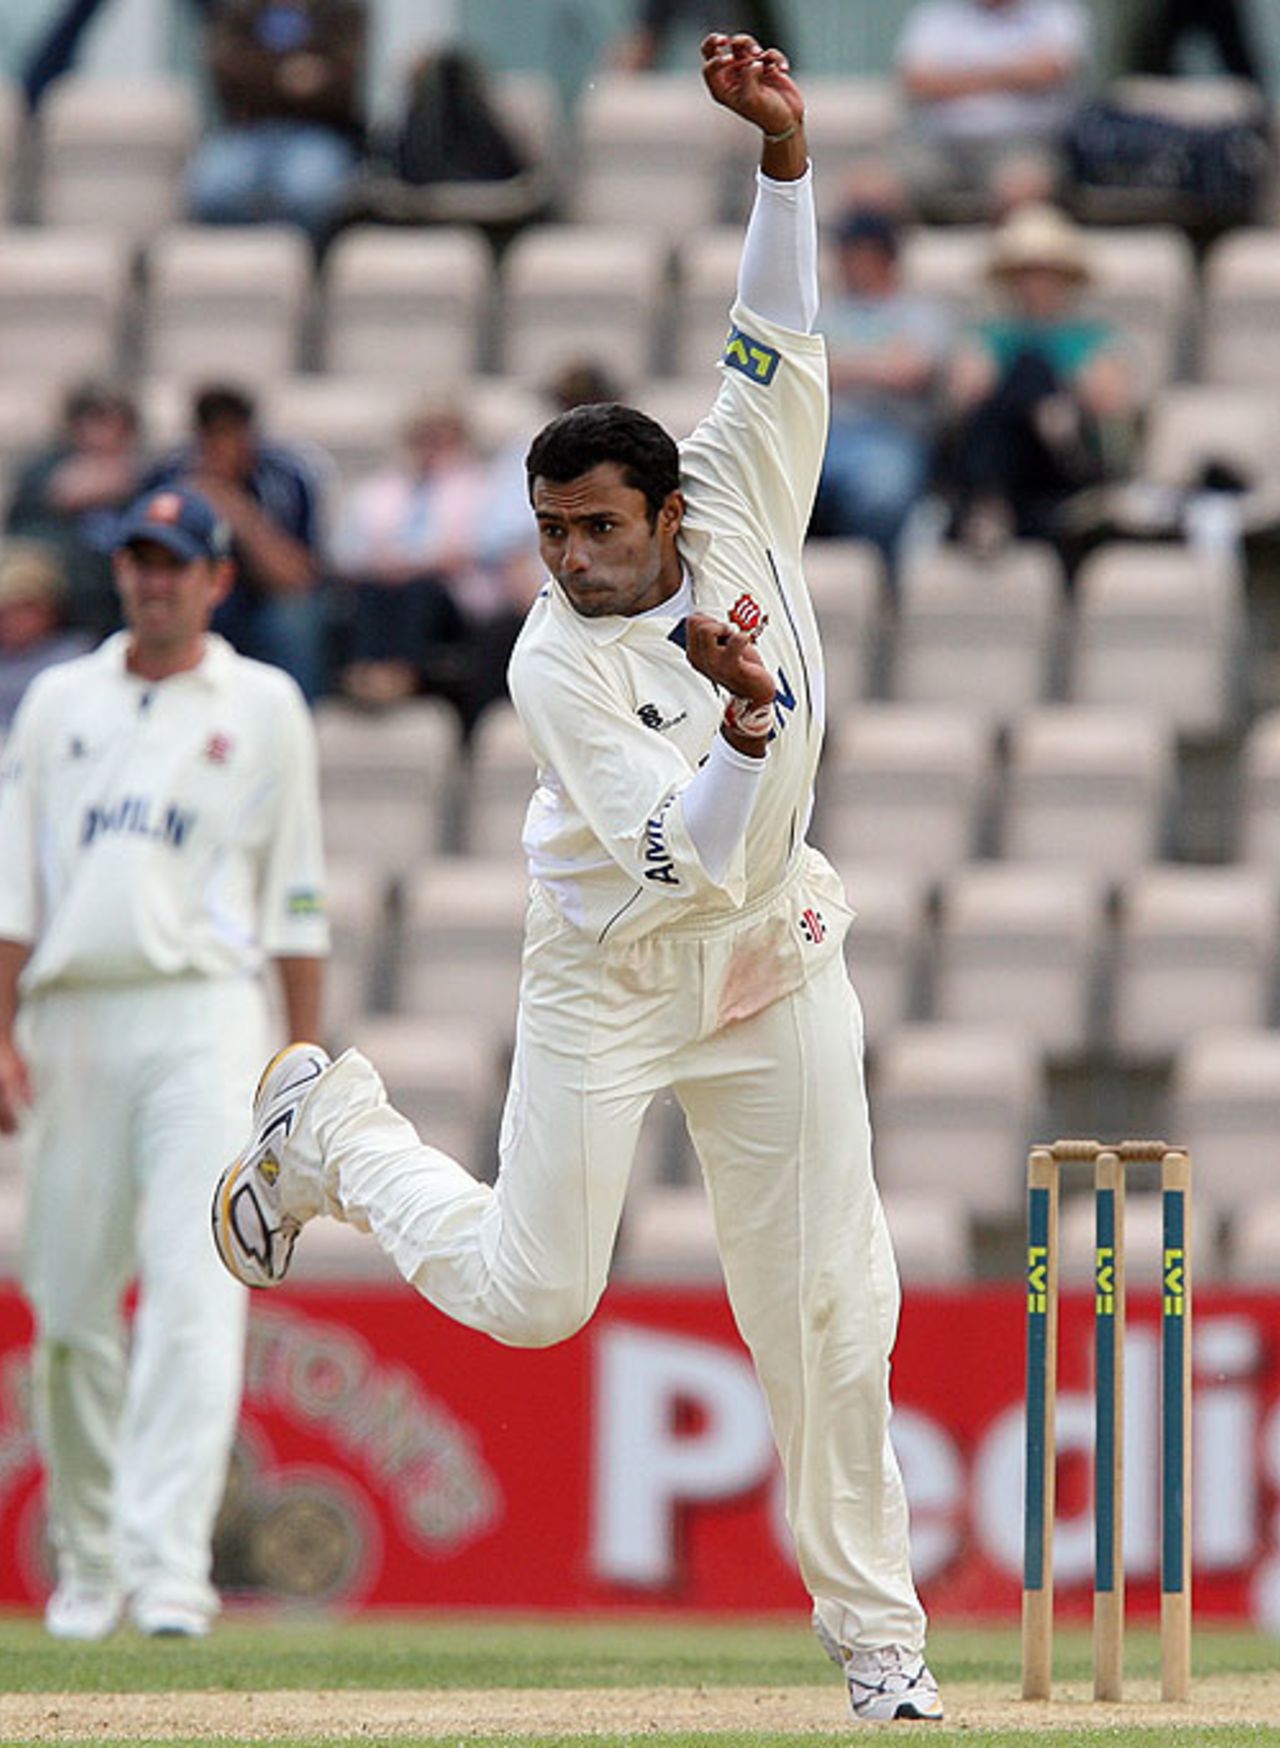 Danish Kaneria bowls during Hampshire's second innings at the Rose Bowl, Hampshire v Essex, County Championship Division One, Rose Bowl, June 6, 2010